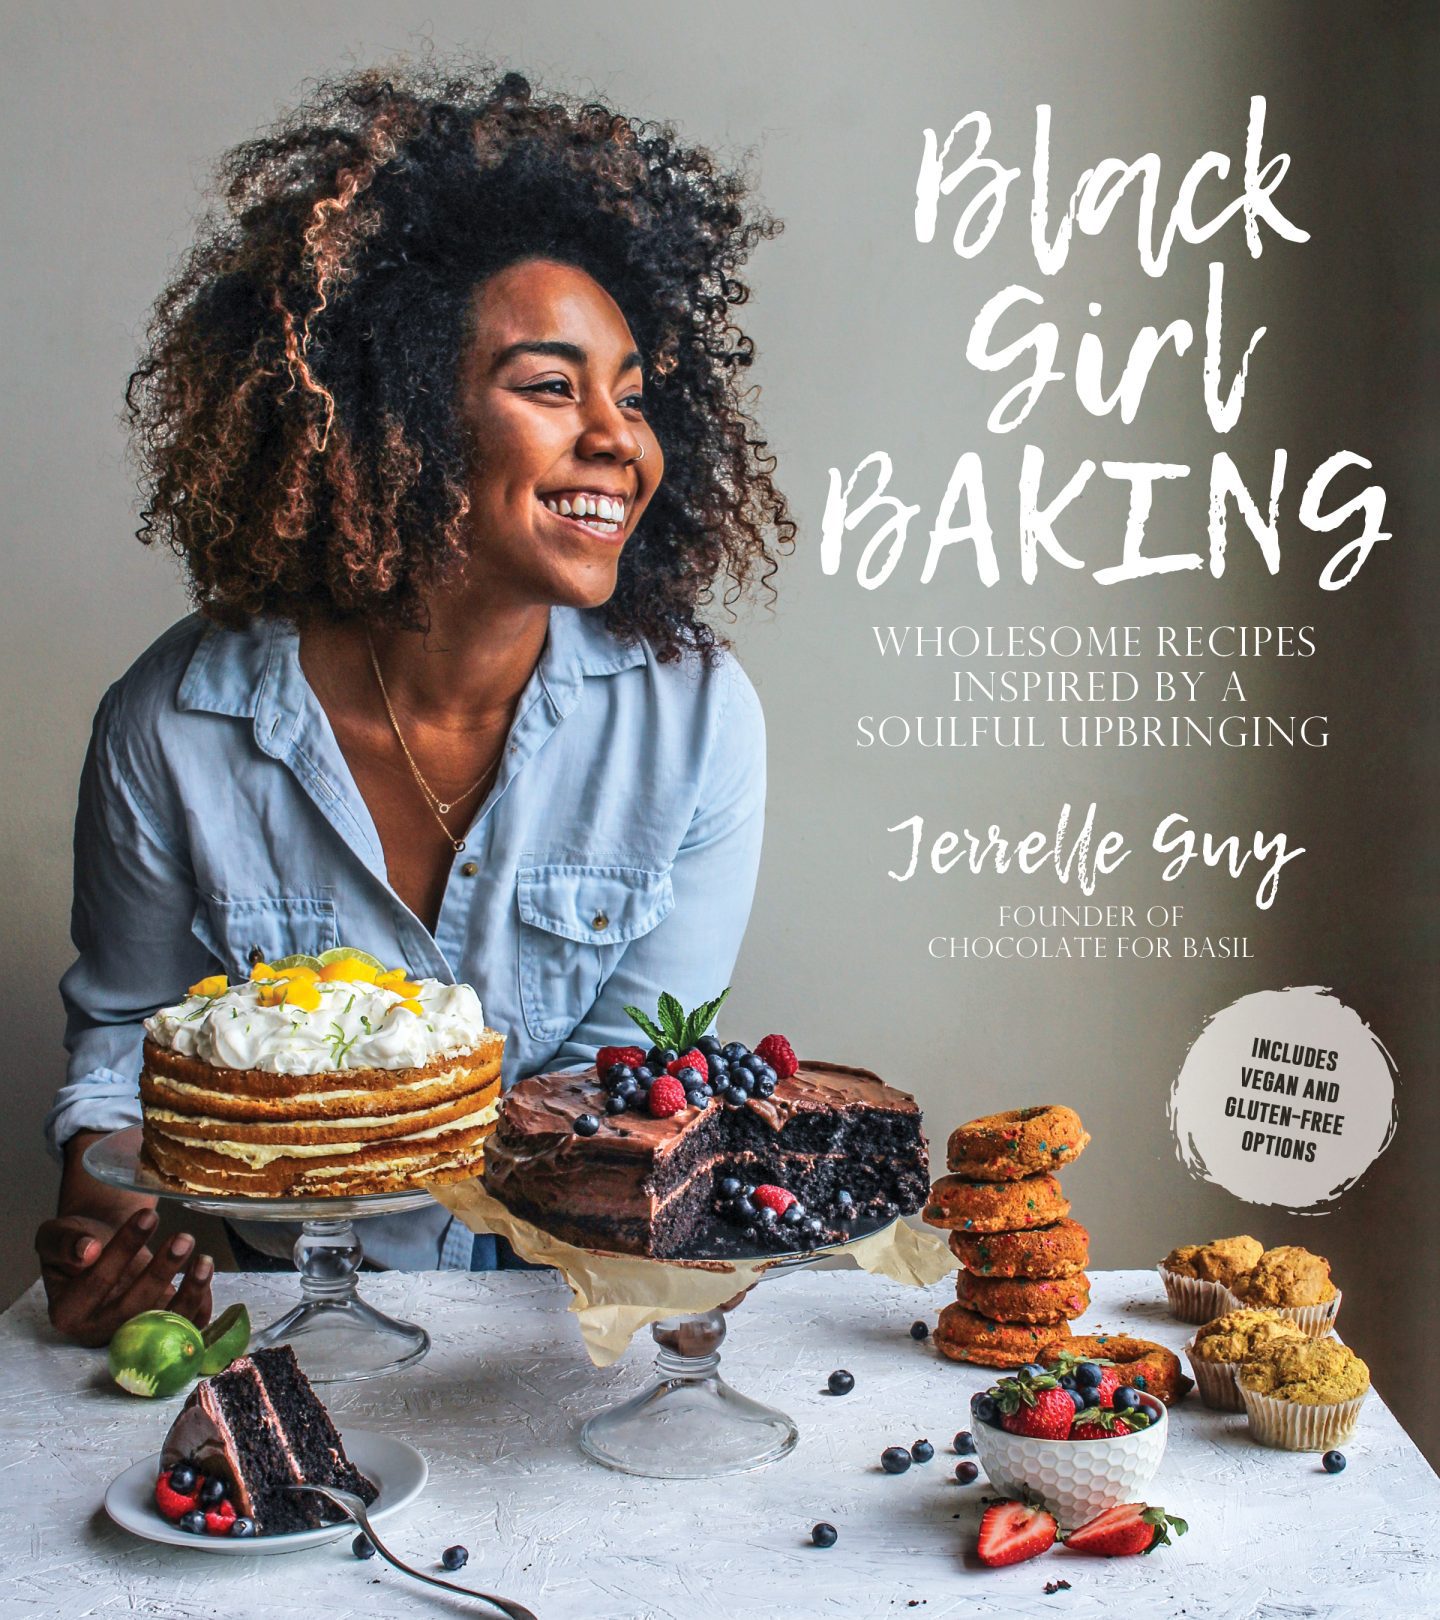 Black Girl Baking by Jerrelle Guy and the Essentials for Southern Baking